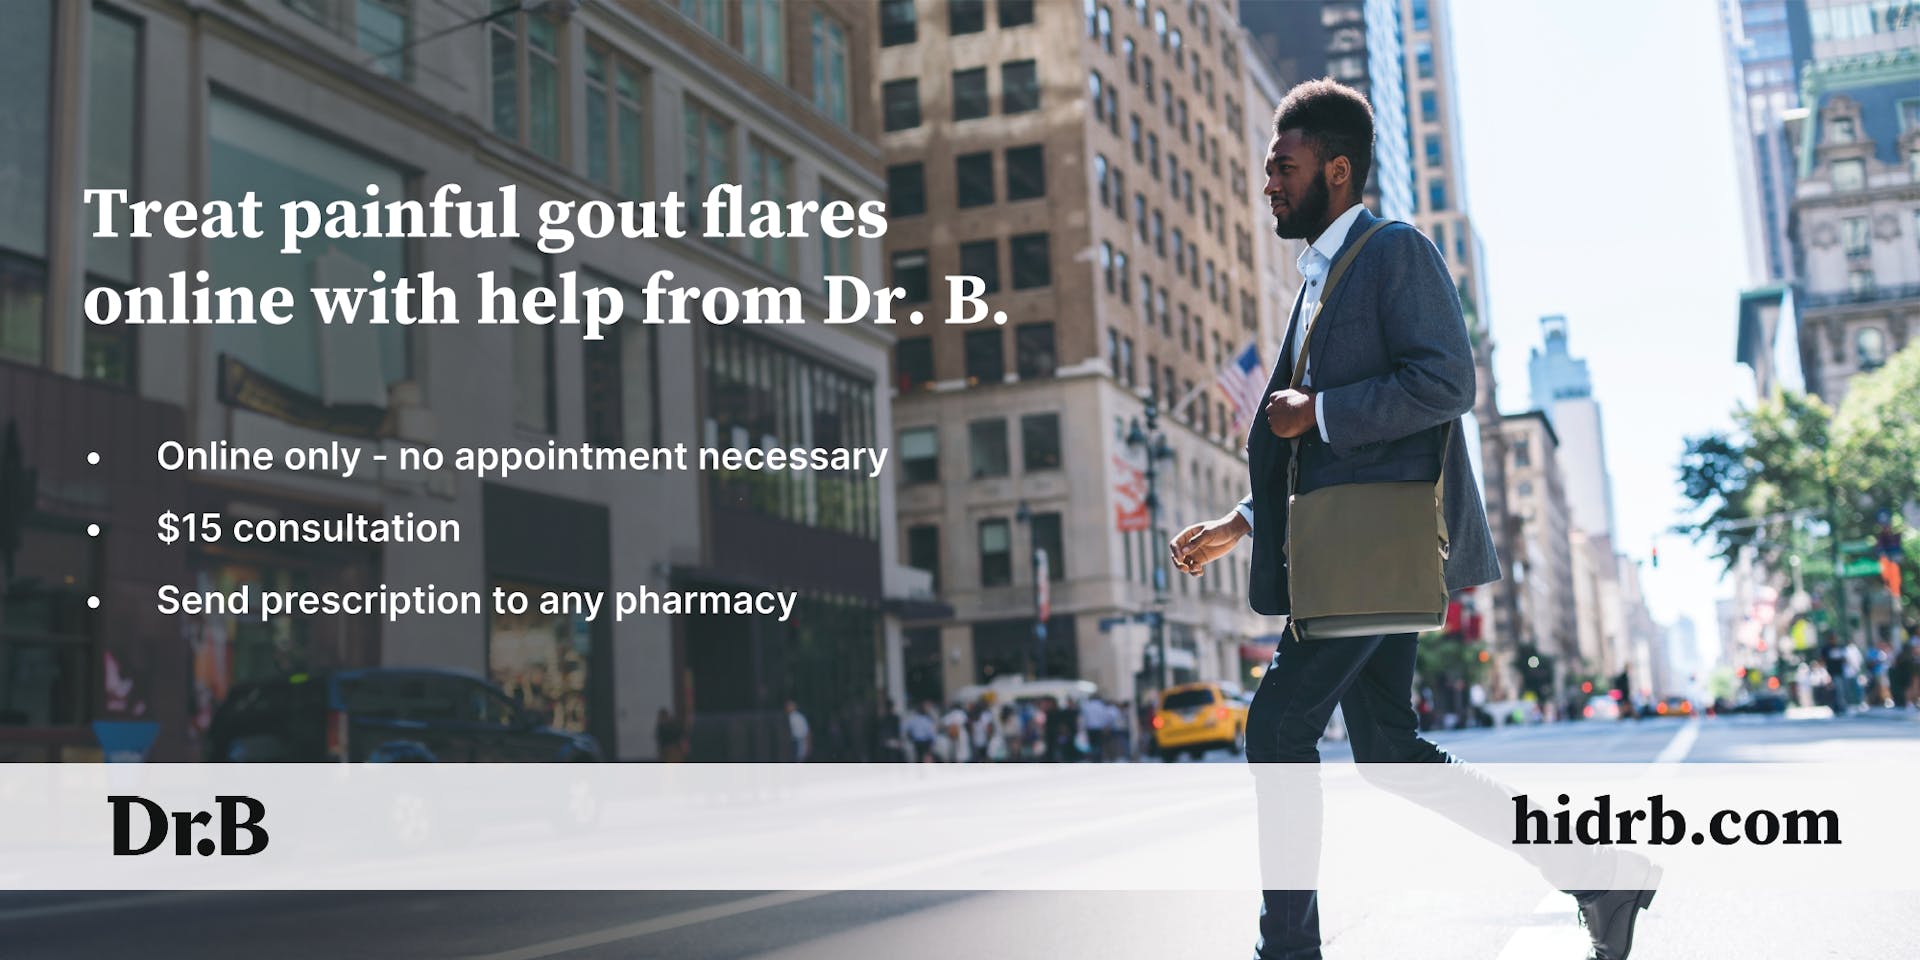 Banner advertising Dr. B's services for gout treatments